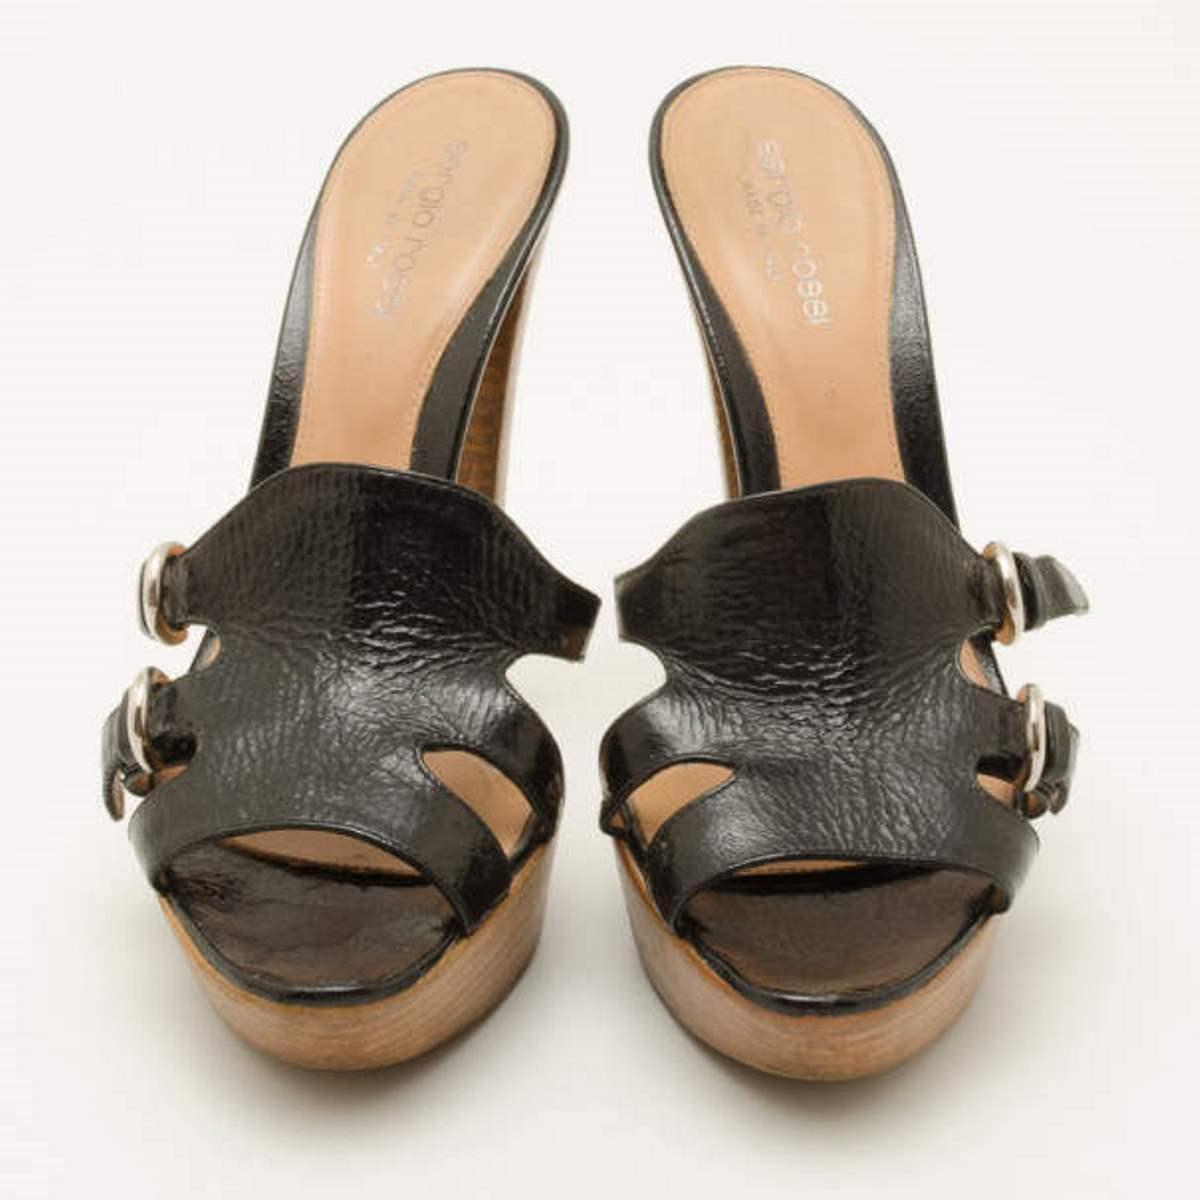 Finish your outfit with these Black Leather Wooden Platform Slides by Sergio Rossi for a edgy and stylish look. Crafted from distressed black leather that is accented with silver buckle detailing and 13 CM wooden platform heels. The insoles are